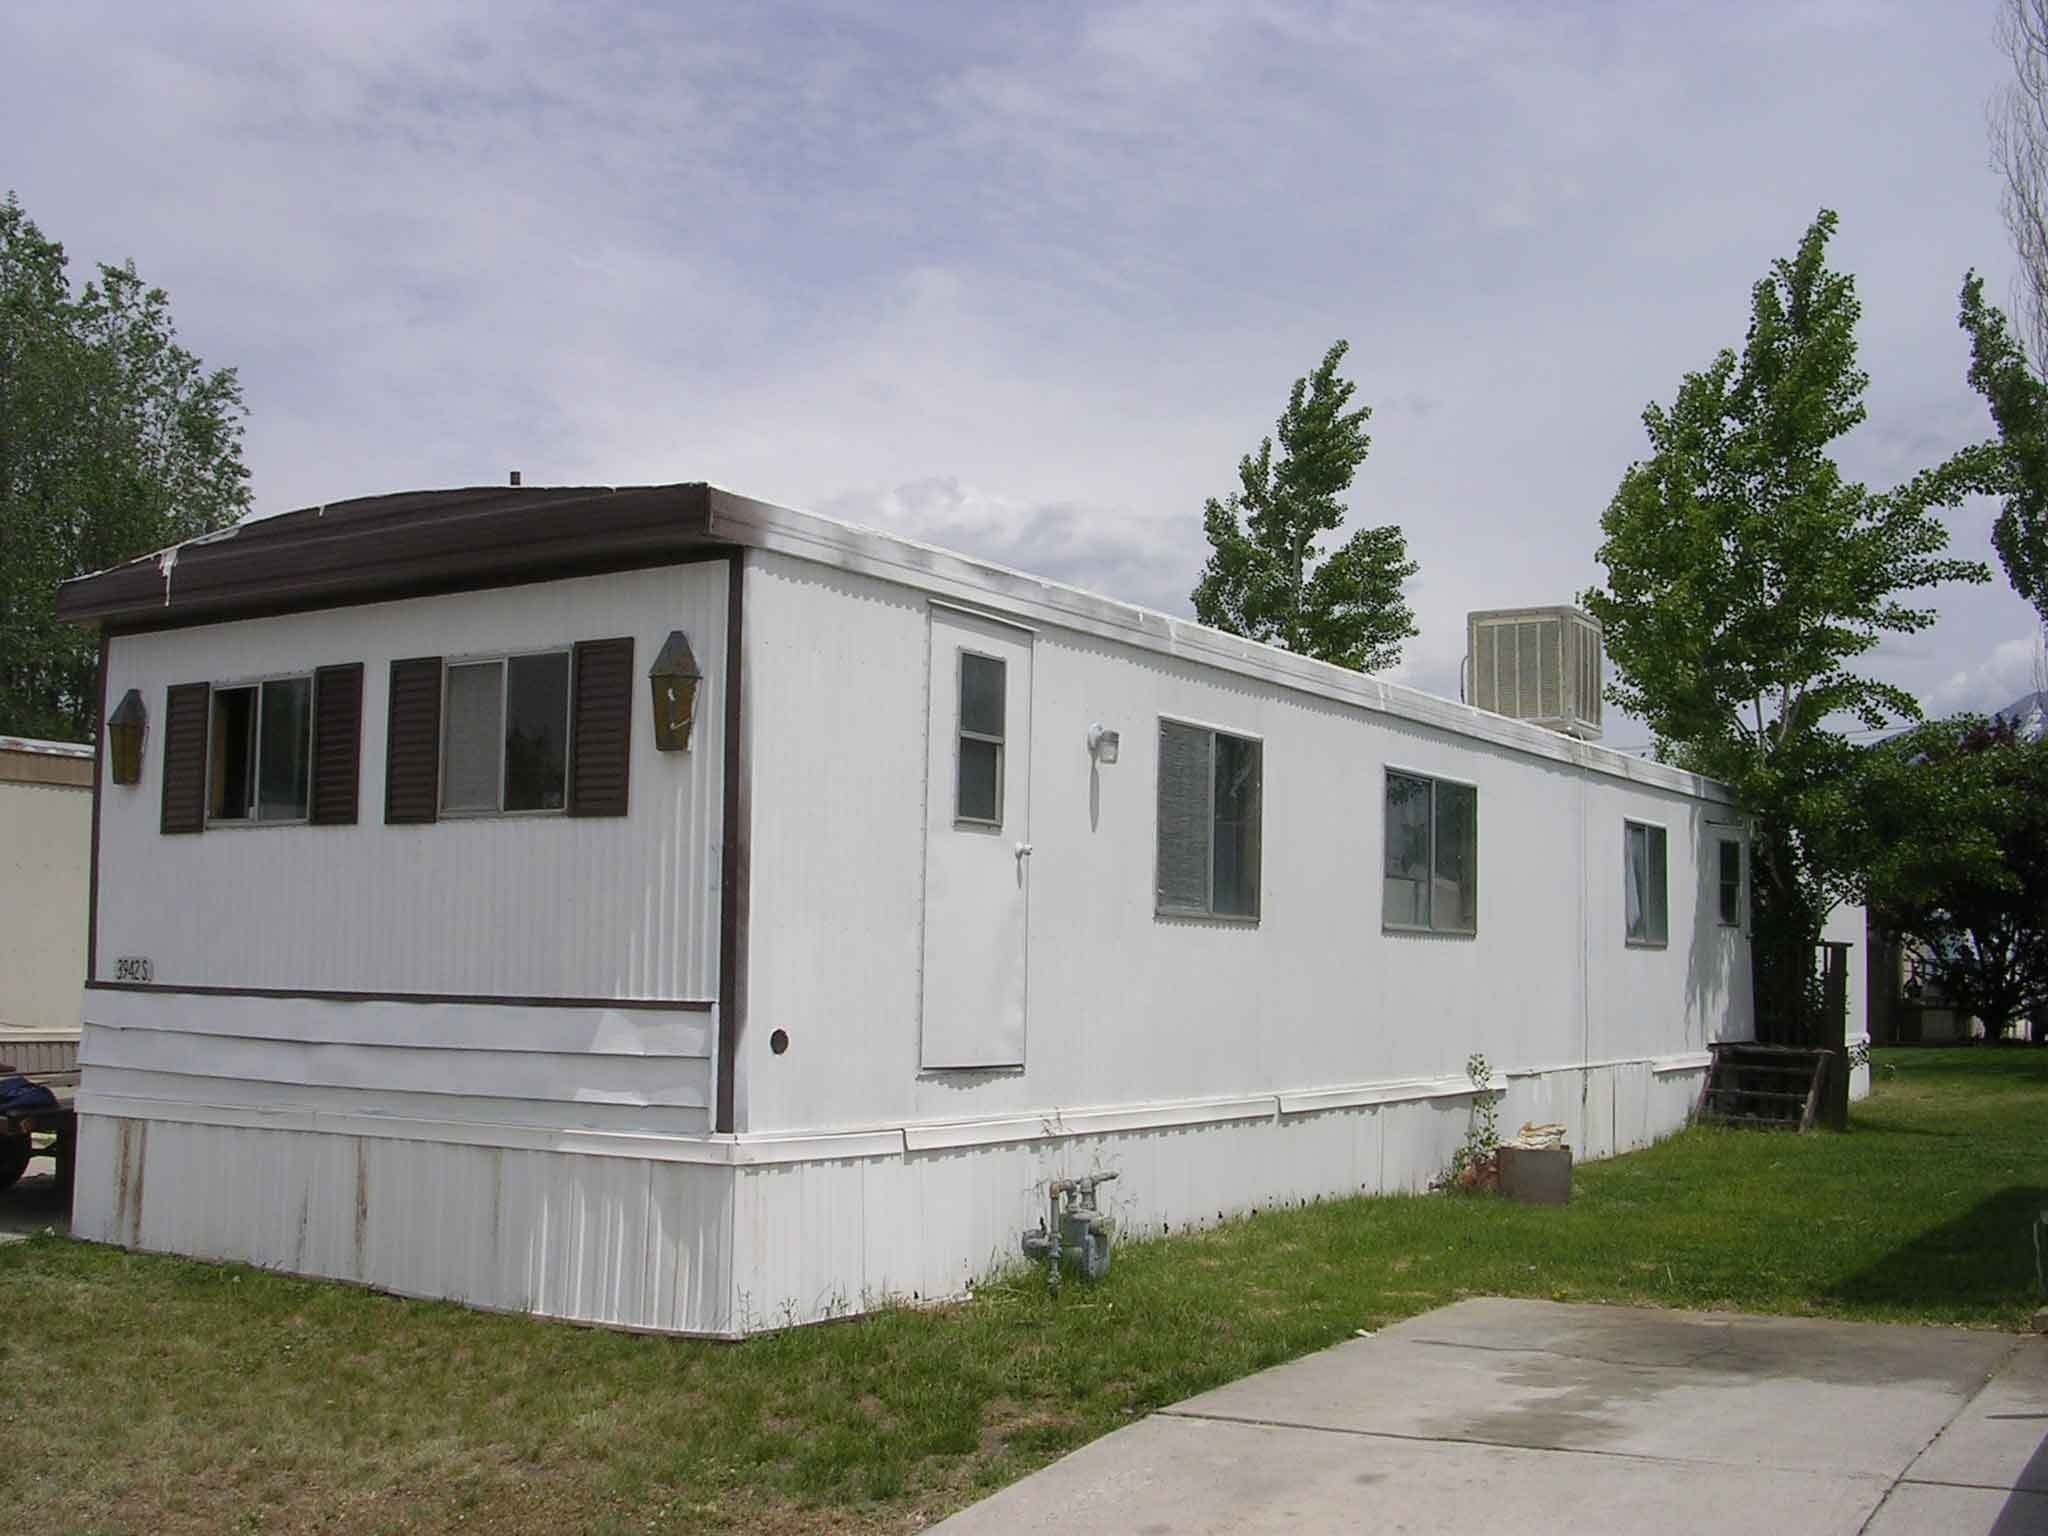 10 Stunning Are Rent To Own Homes A Good Idea utah rent own homes mobile home kaf mobile homes 61712 2022